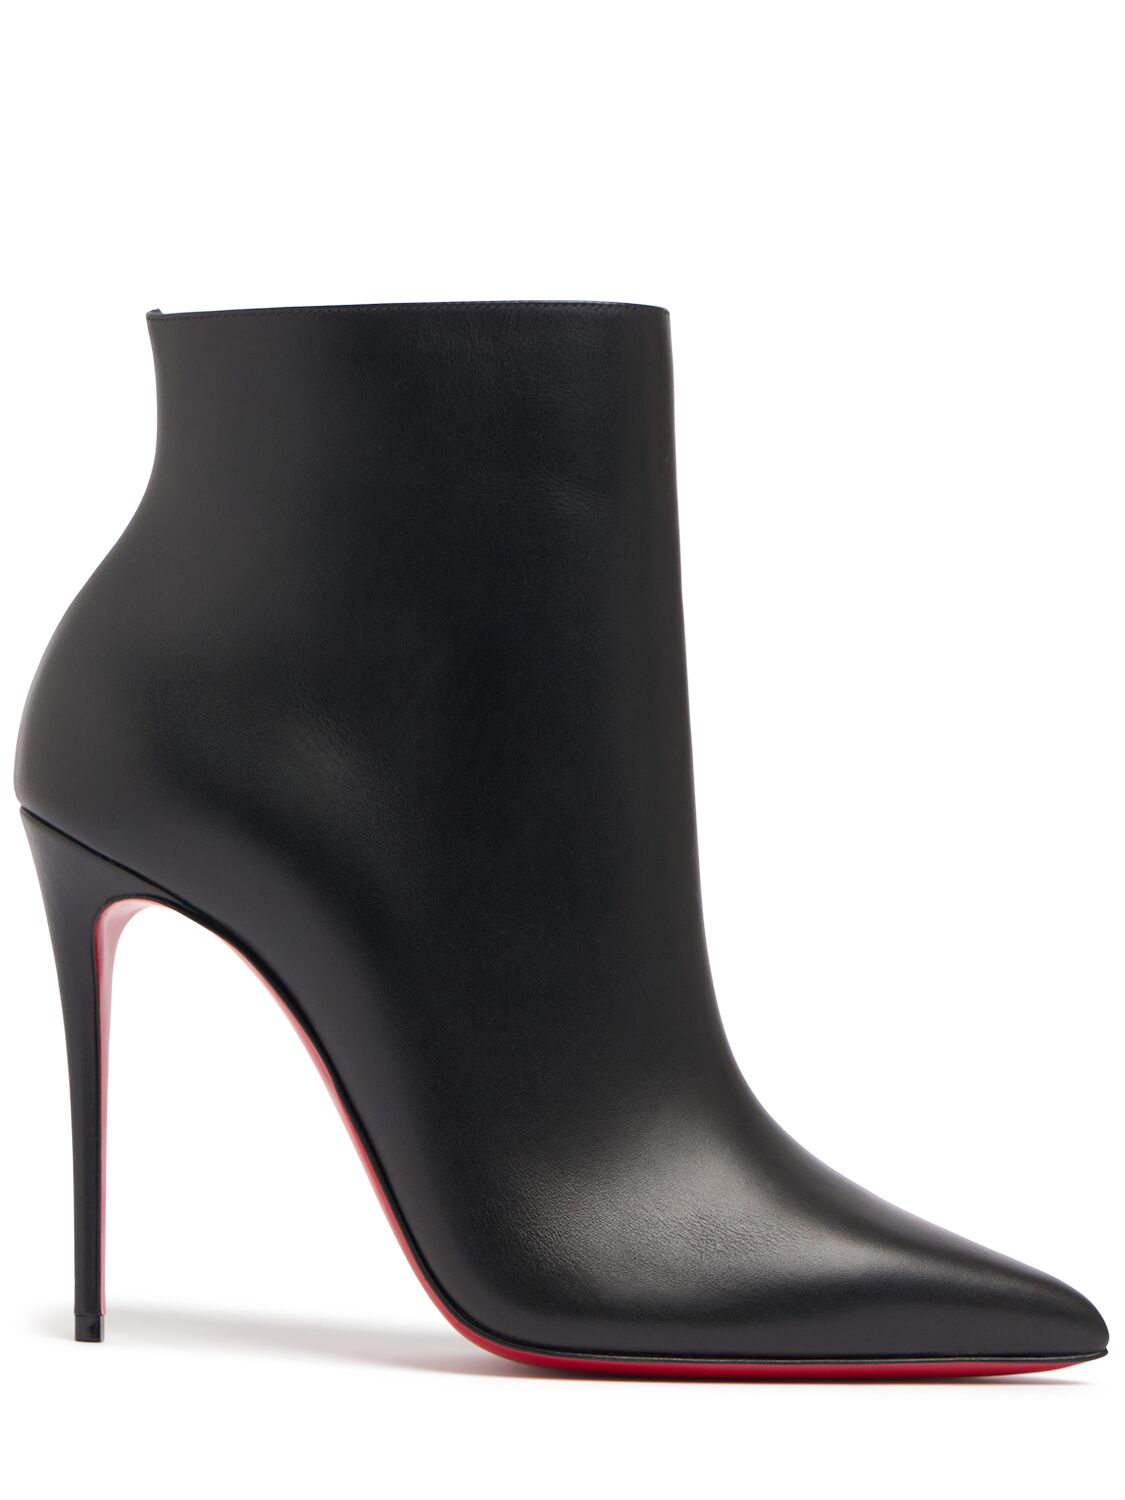 Christian Louboutin 100mm So Kate Leather Ankle Boots In Black